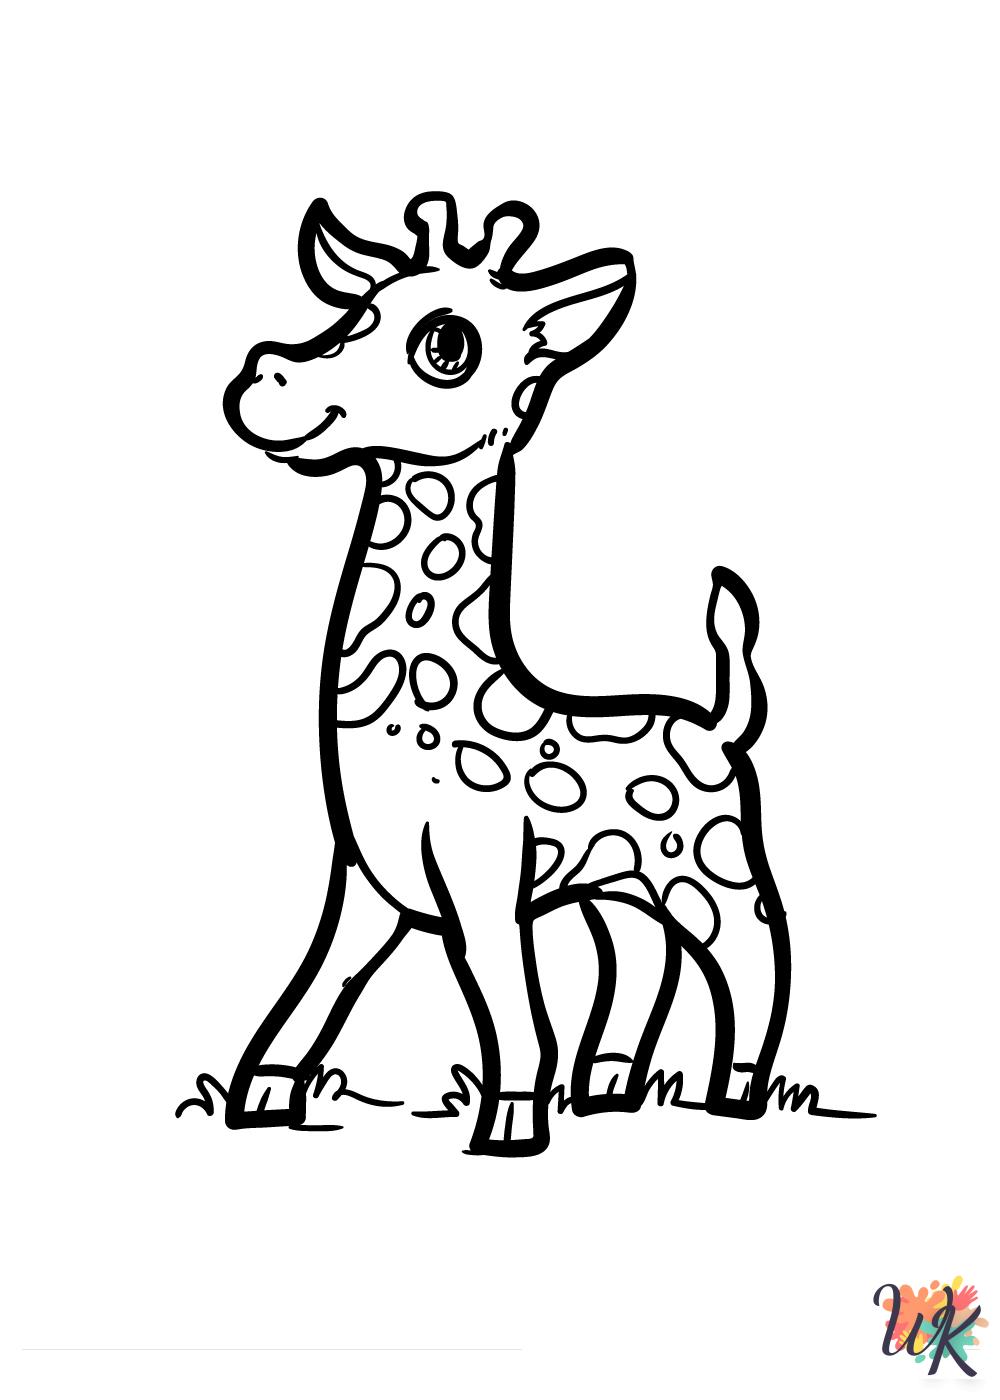 Giraffe coloring pages for adults easy